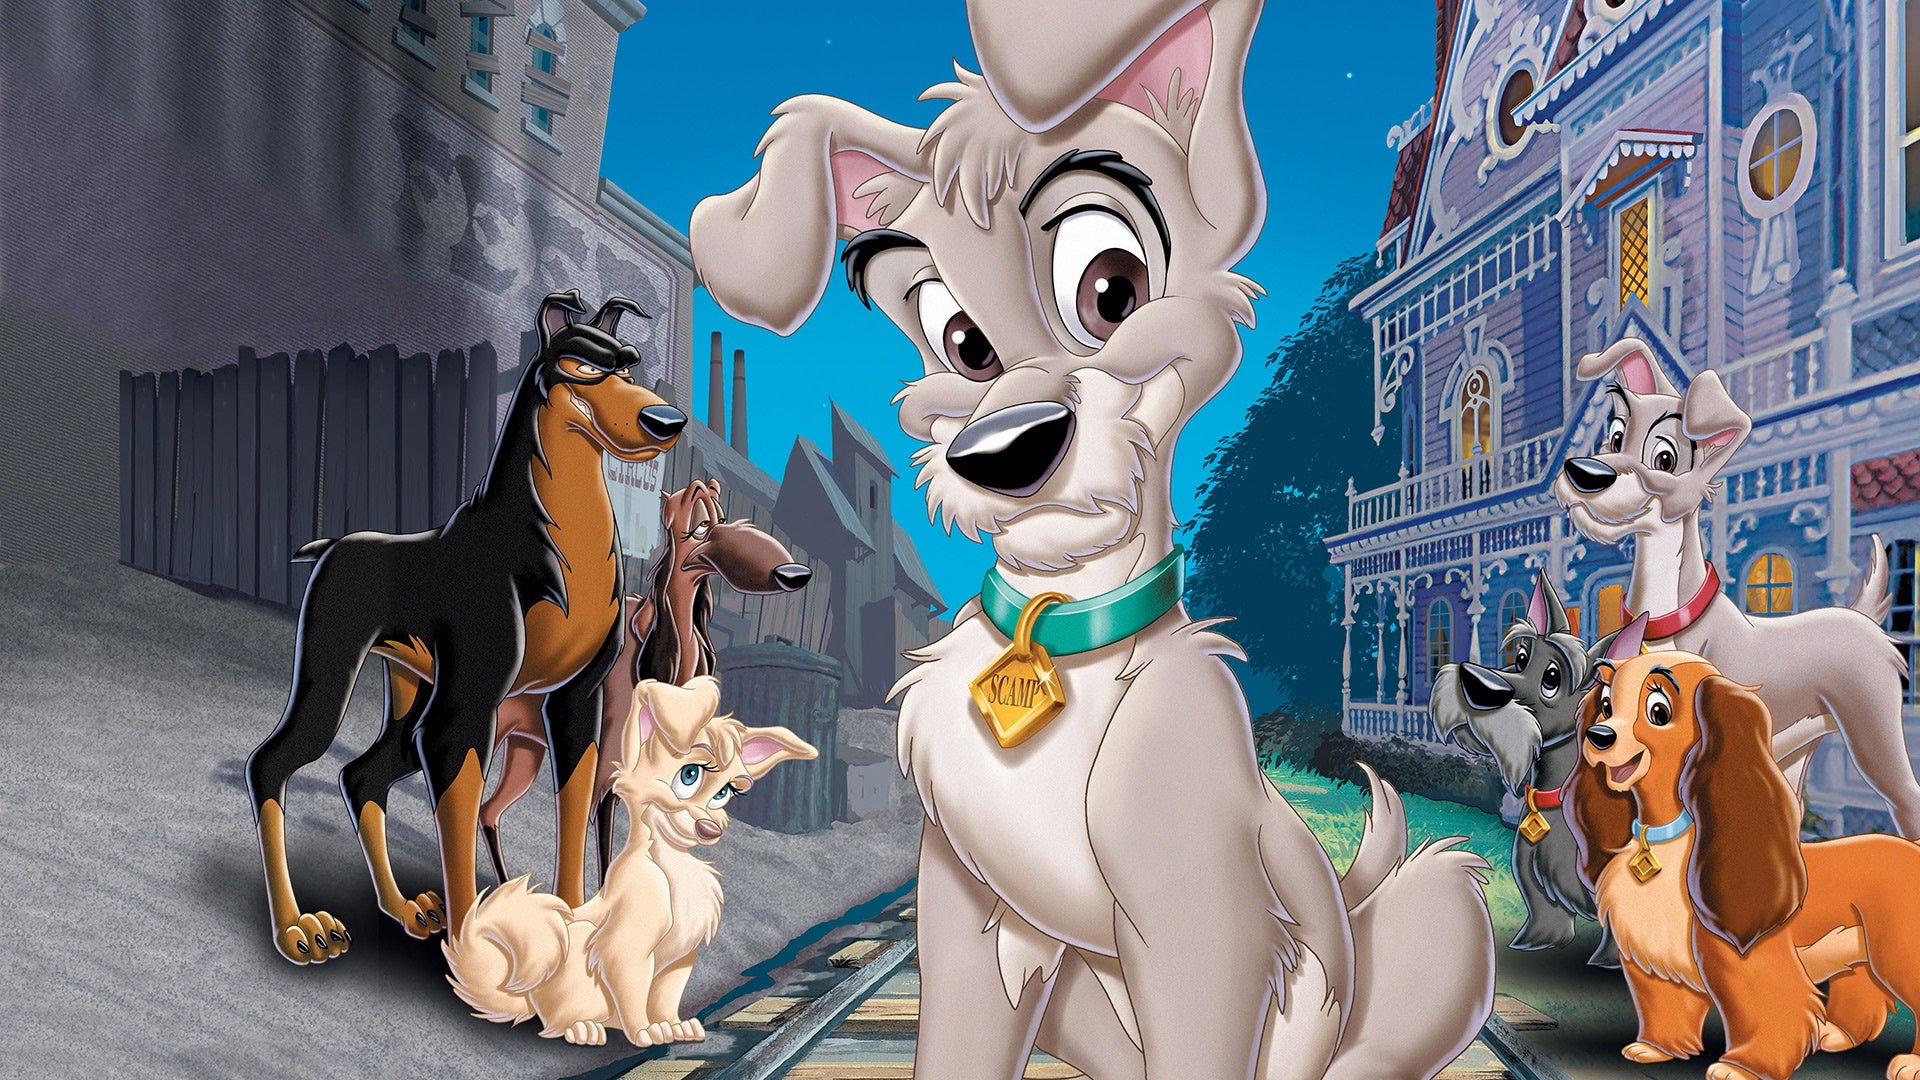 Disney's Lady and the Tramp / Lady and the Tramp II: Scamp's Adventure